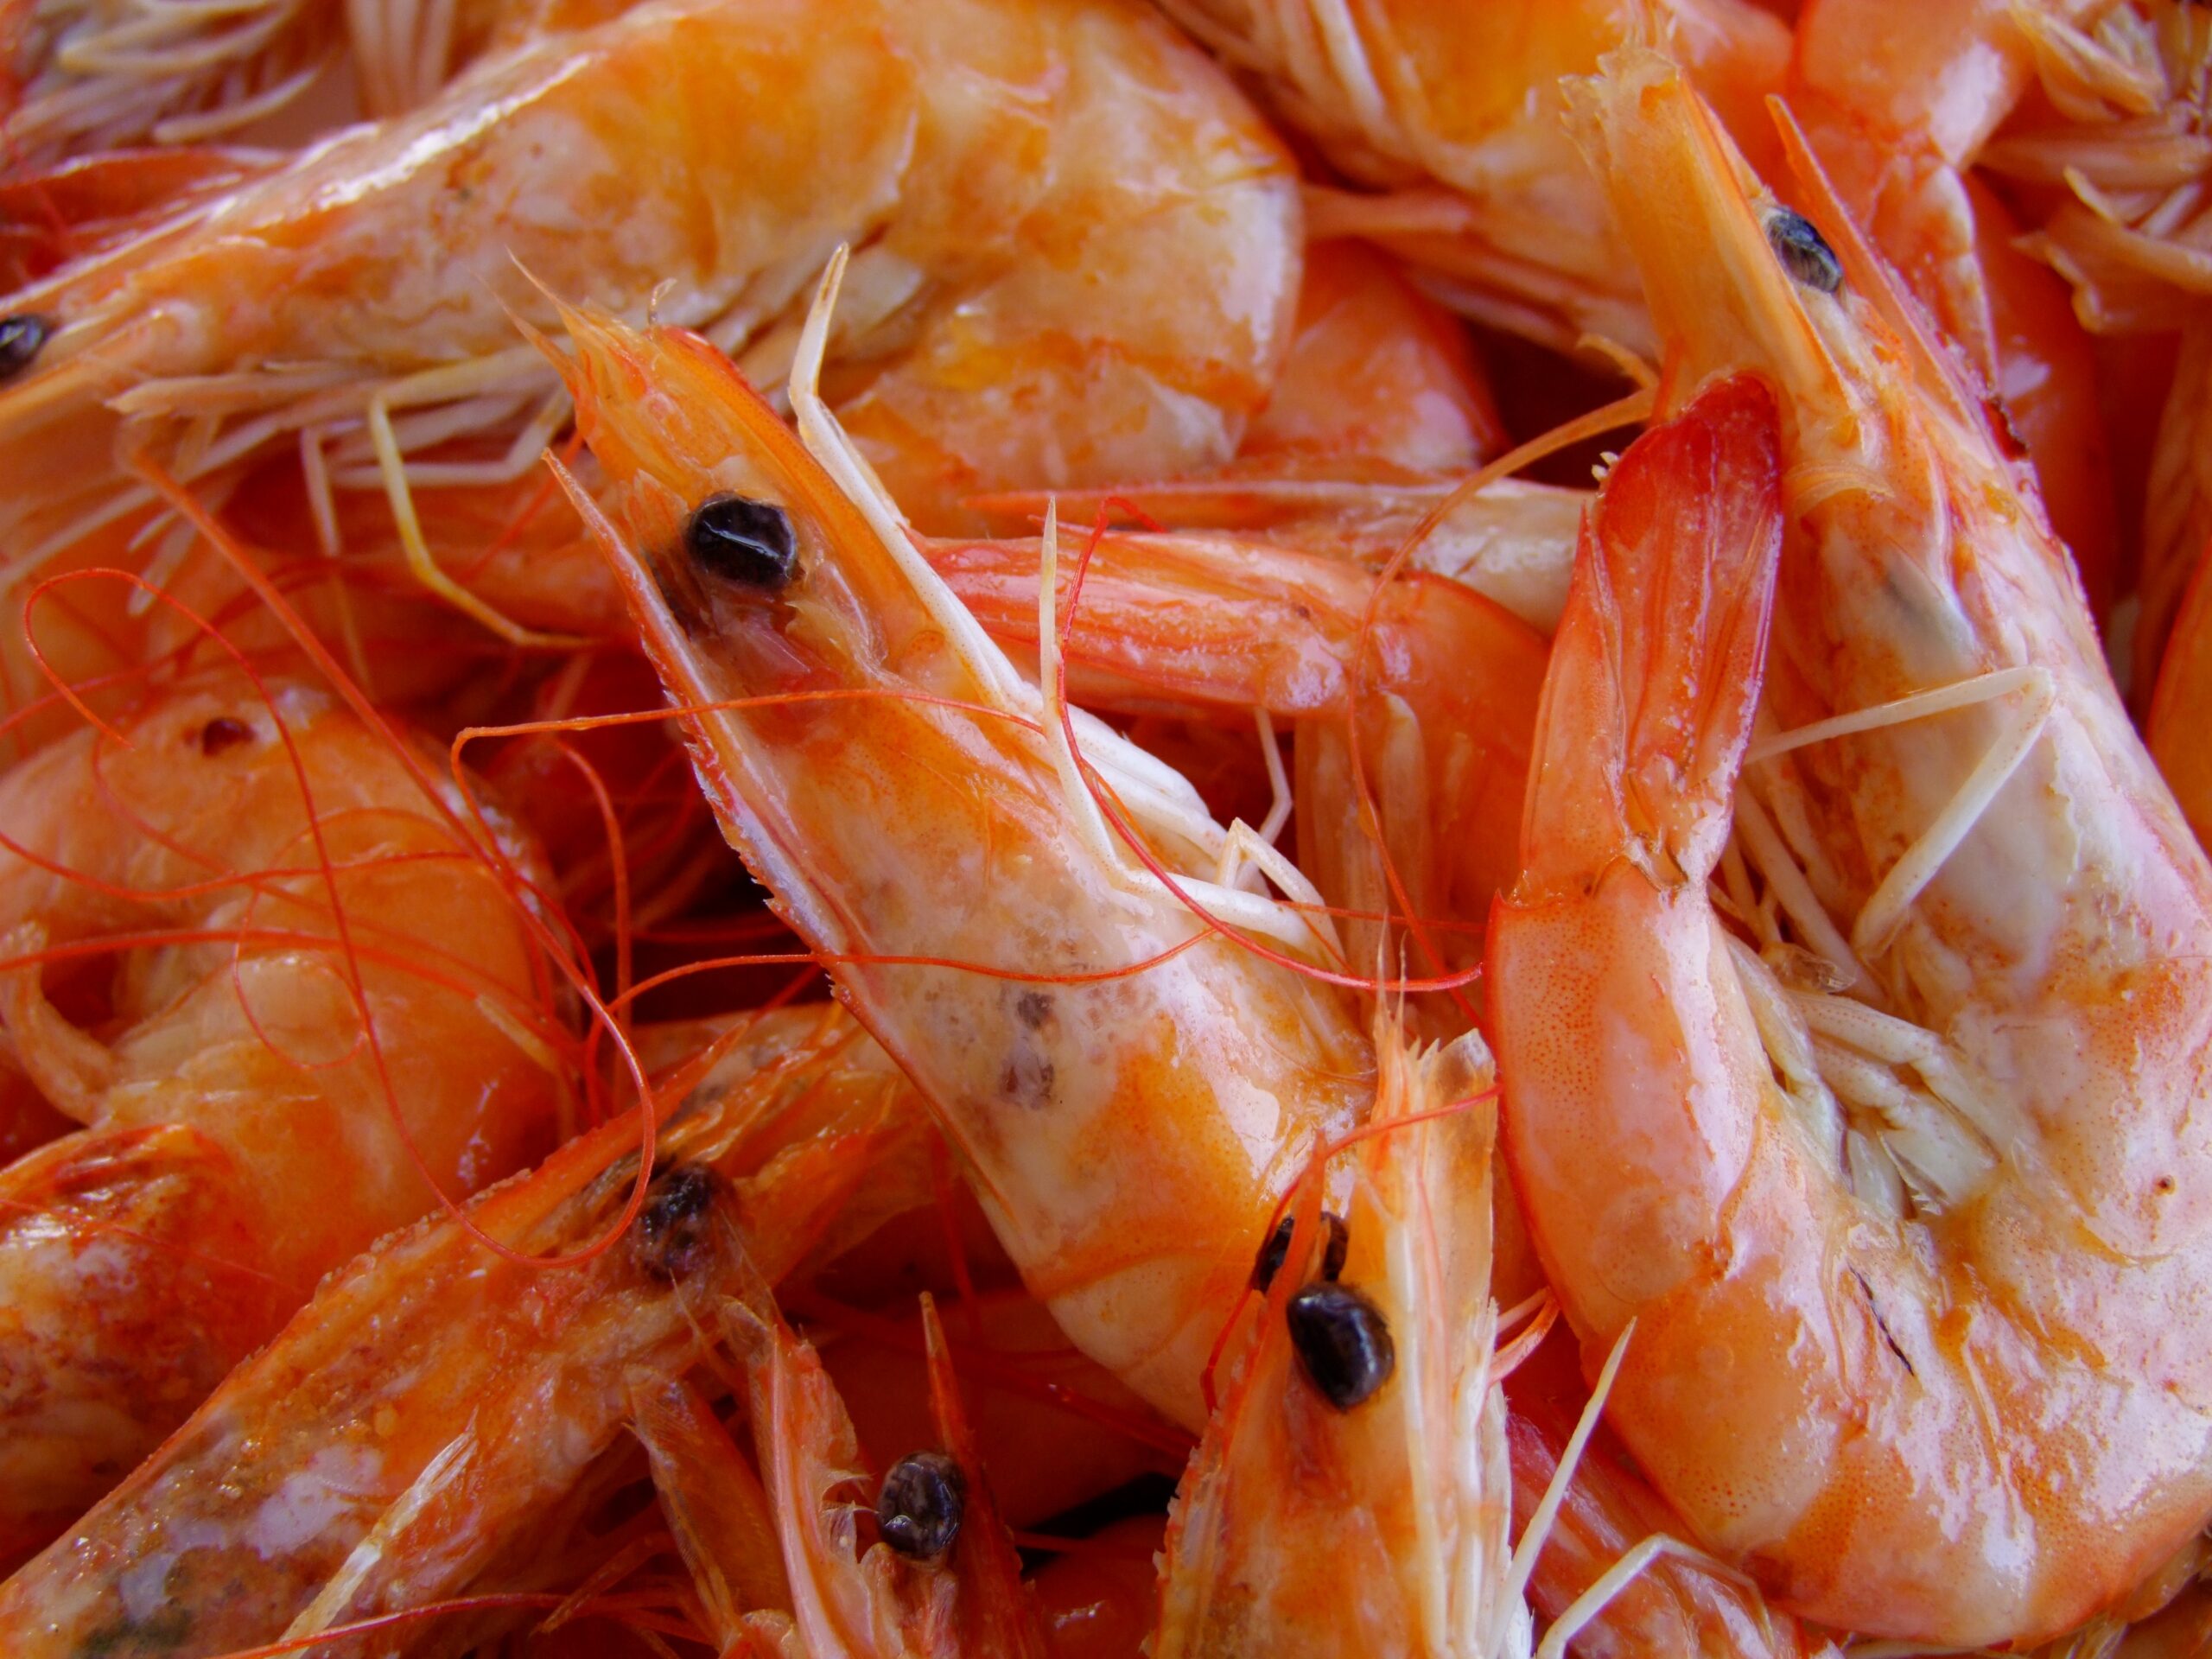 Join Roberts AC at the 50th Annual National Shrimp Festival in Gulf Shores, AL